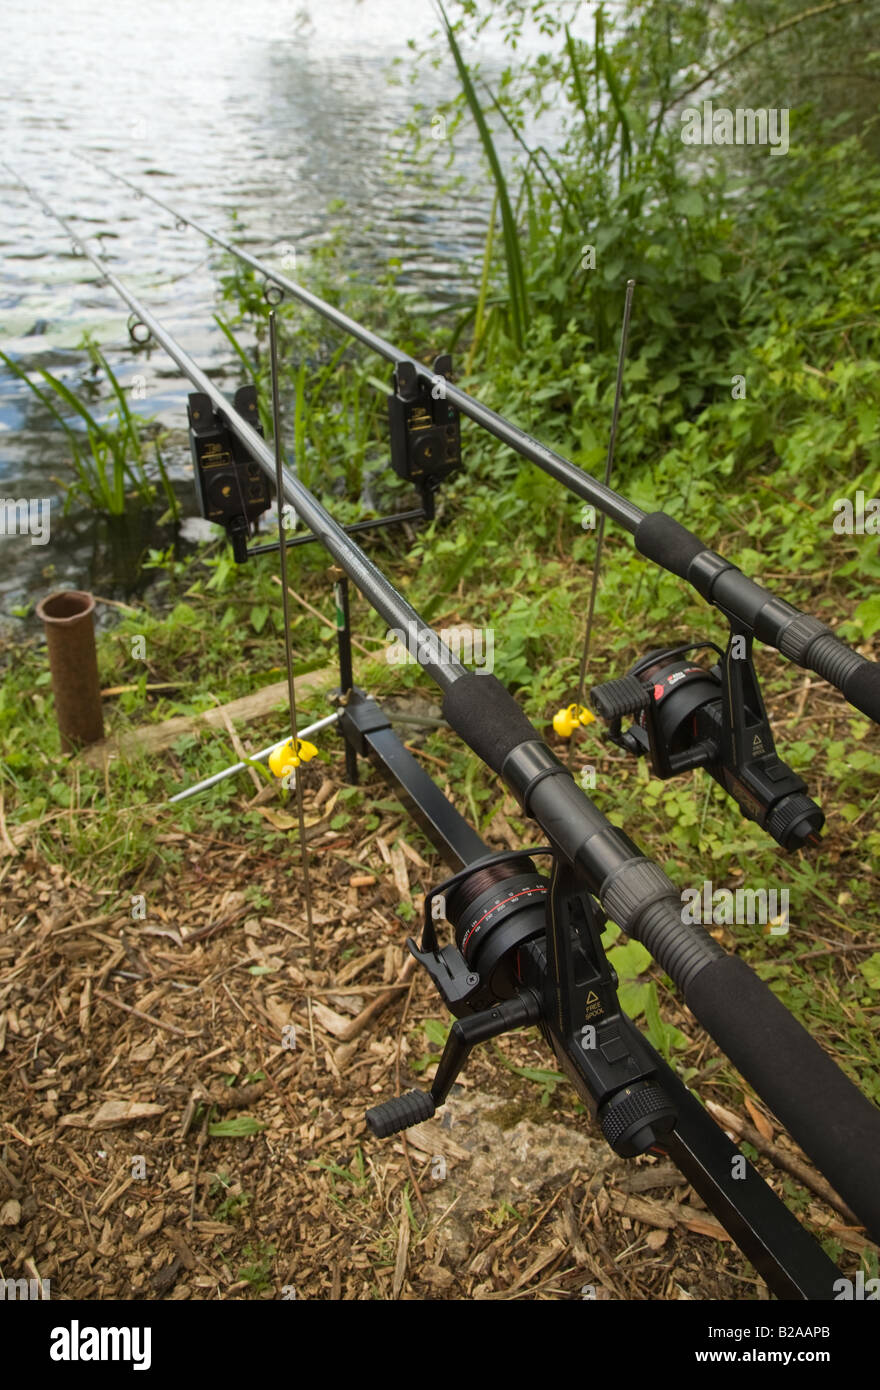 Fishing rods and reels set up with electronic bite alarms to catch